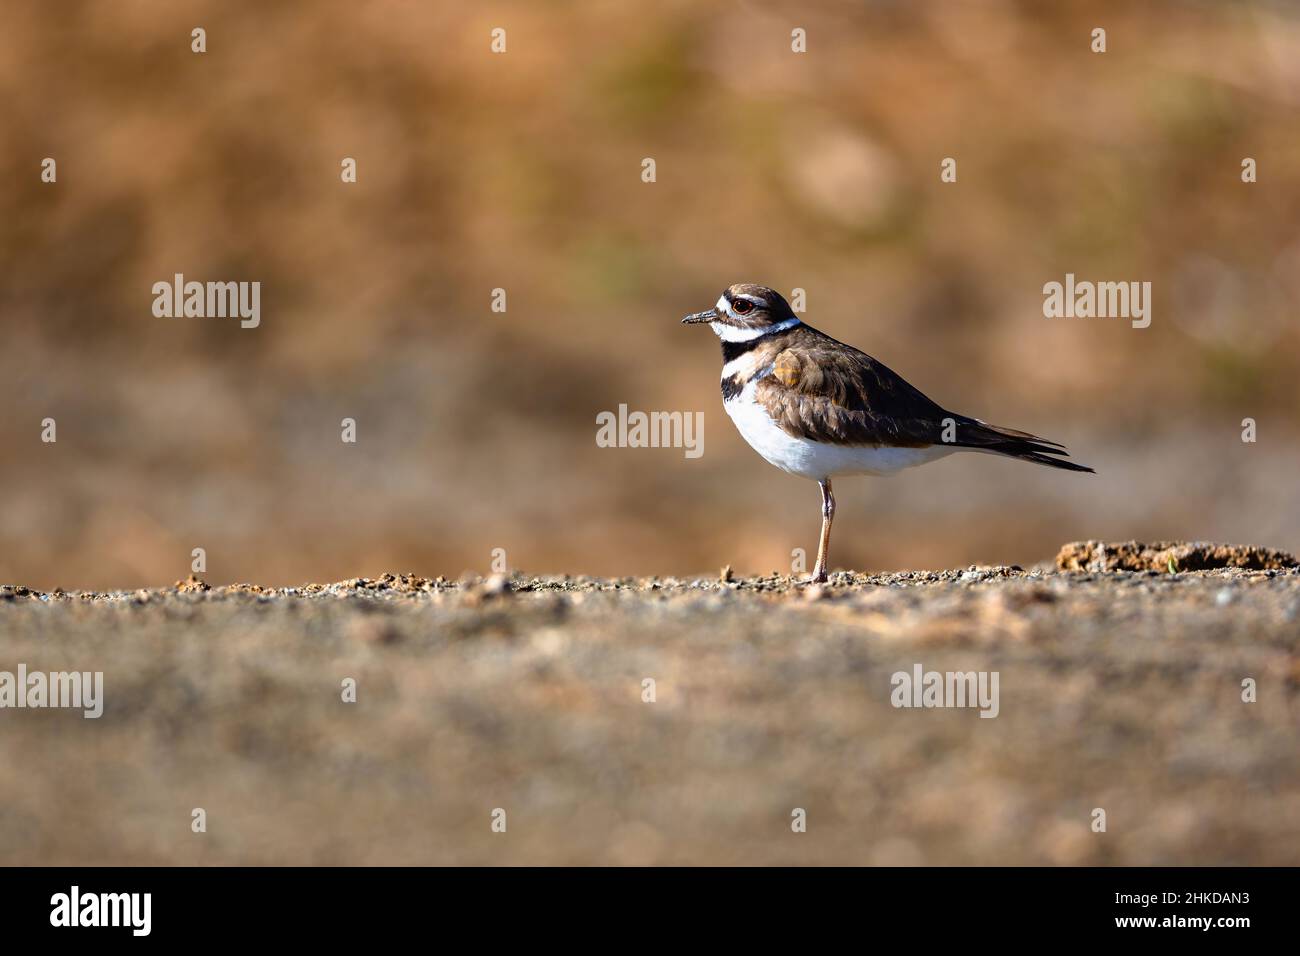 Portrait of a Killdeer plover, standing atop a stretch of flat ground, against a soft, warm background. Stock Photo